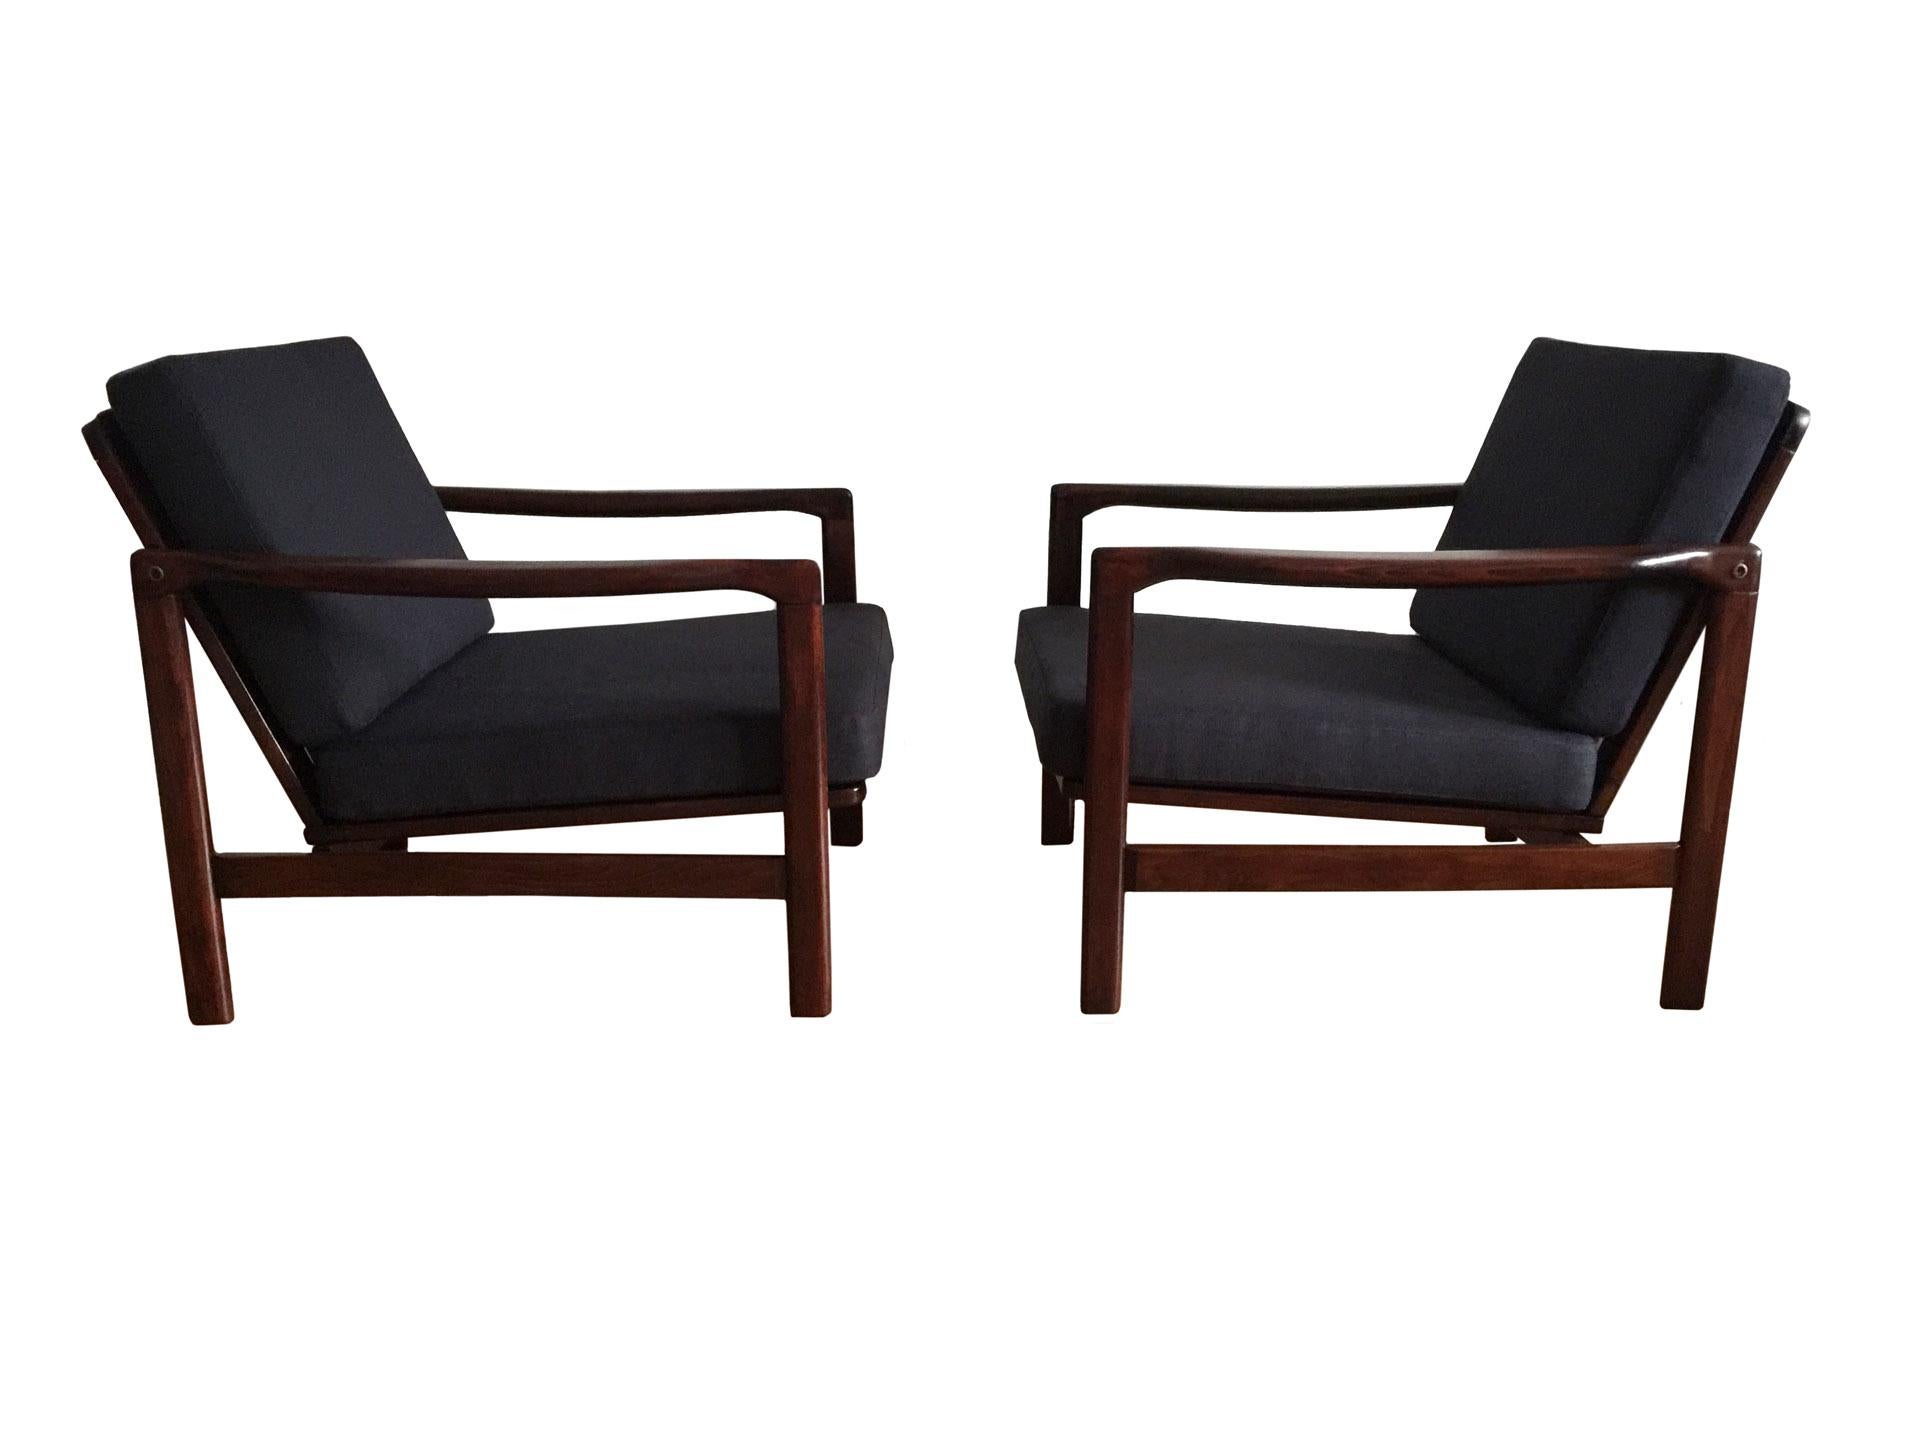 Hand-Crafted Midcentury Lounge Armchairs Set in Dark Blue Linen, Zenon Bączyk, 1960s For Sale